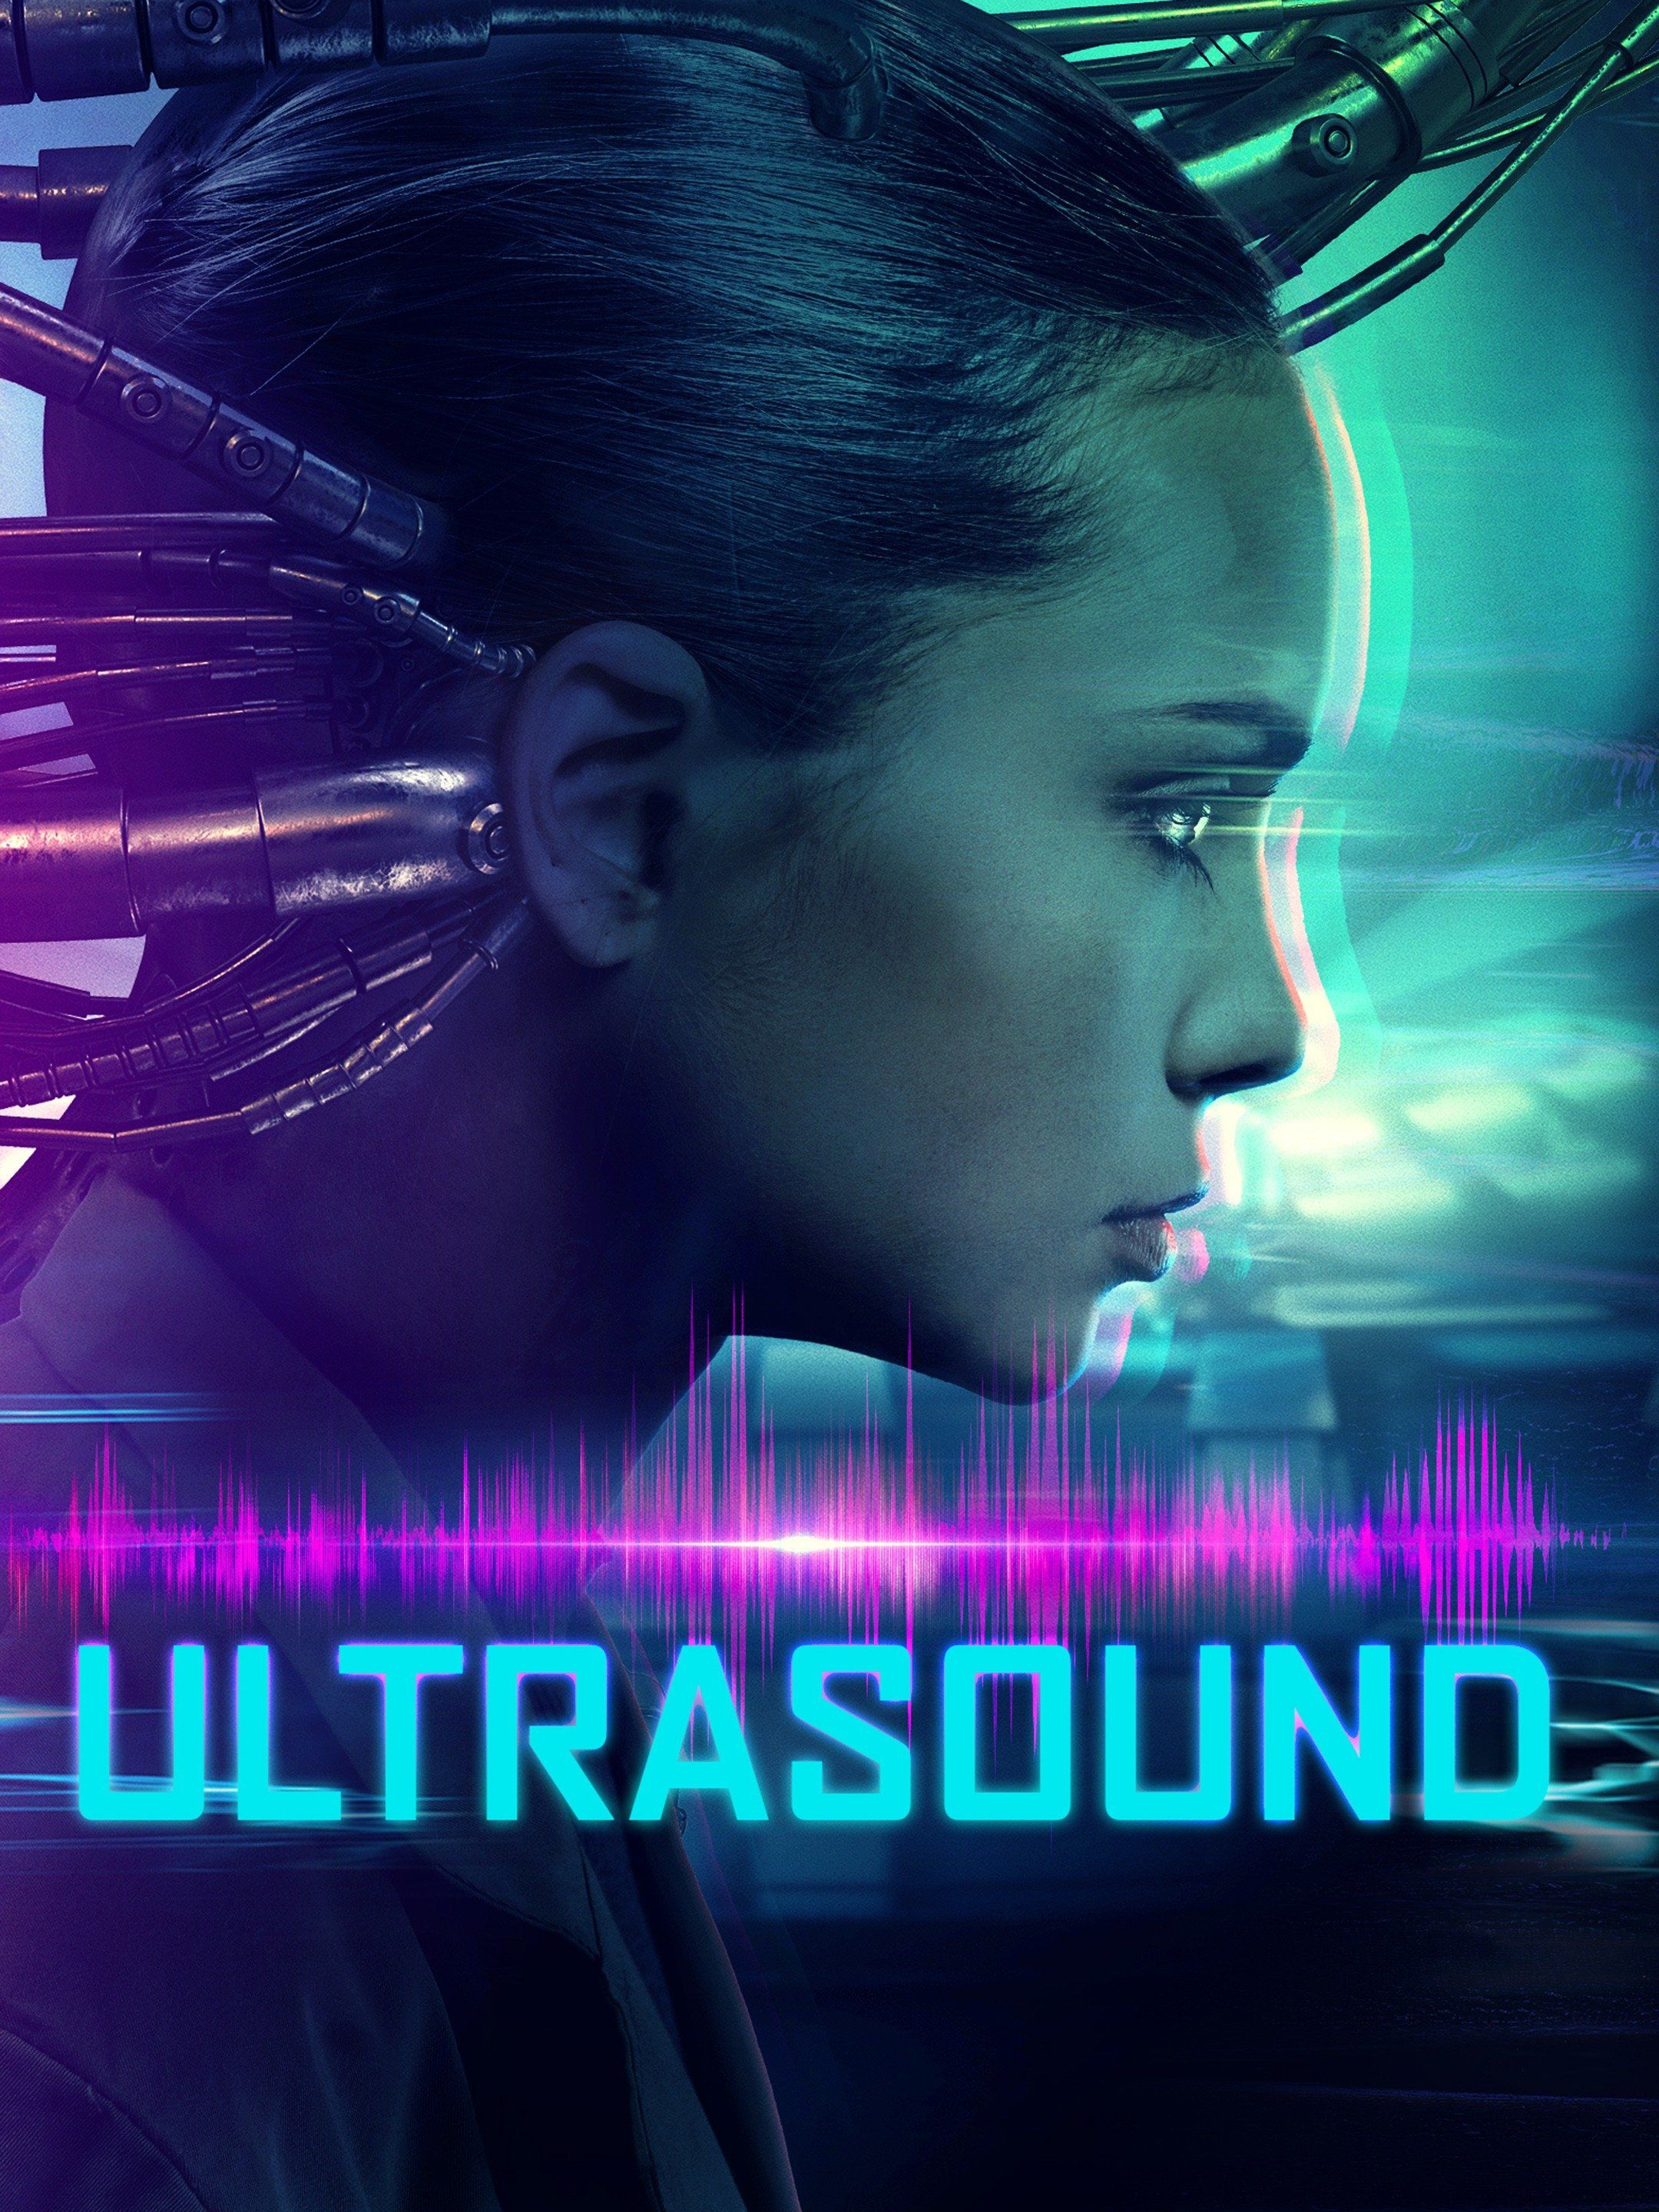 Ultrasound (2021) Hindi Dubbed Movie download full movie